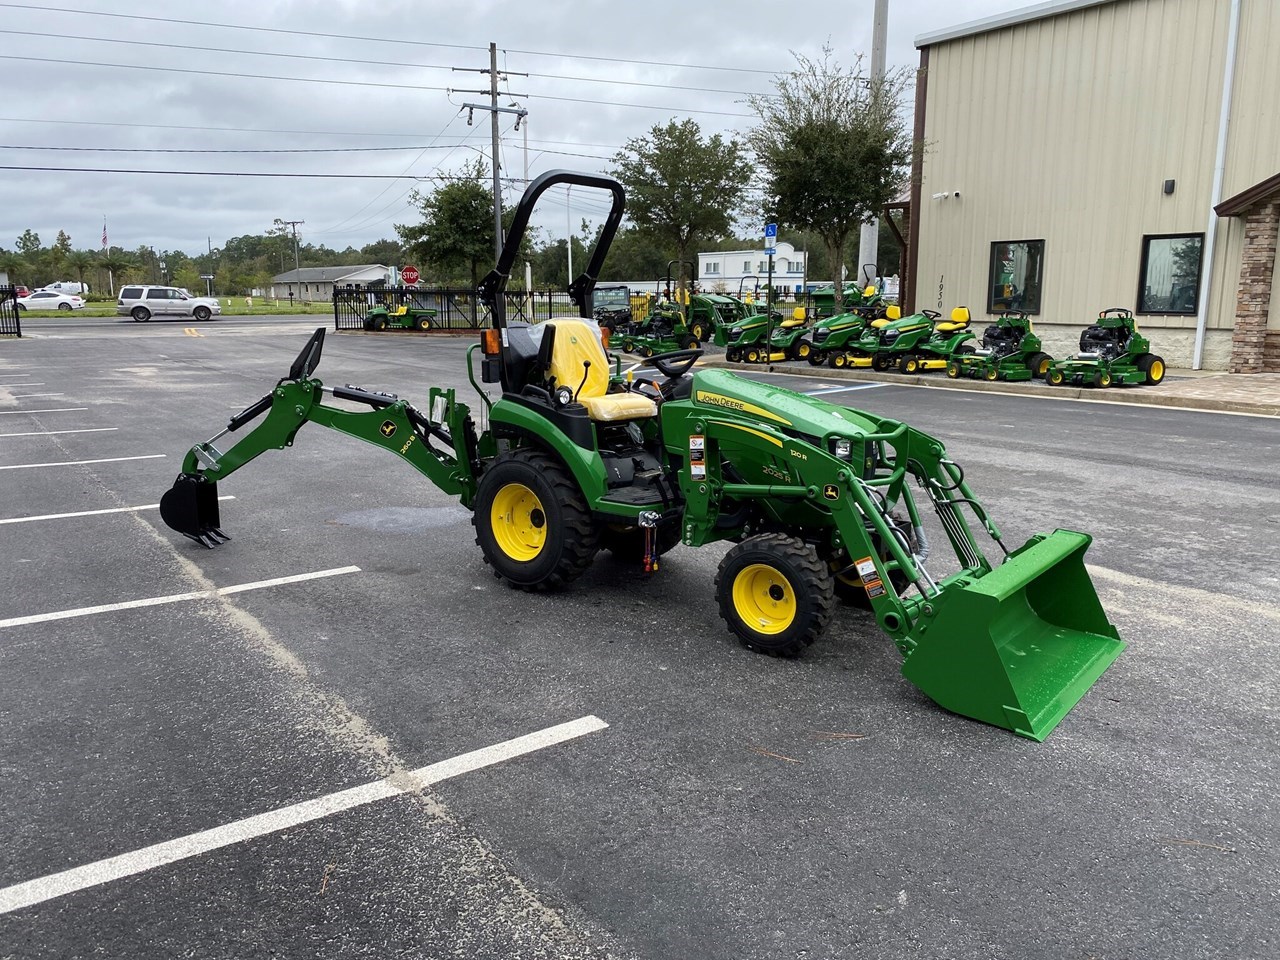 2023 John Deere 2025r Tlb Compact Utility Tractor For Sale In St